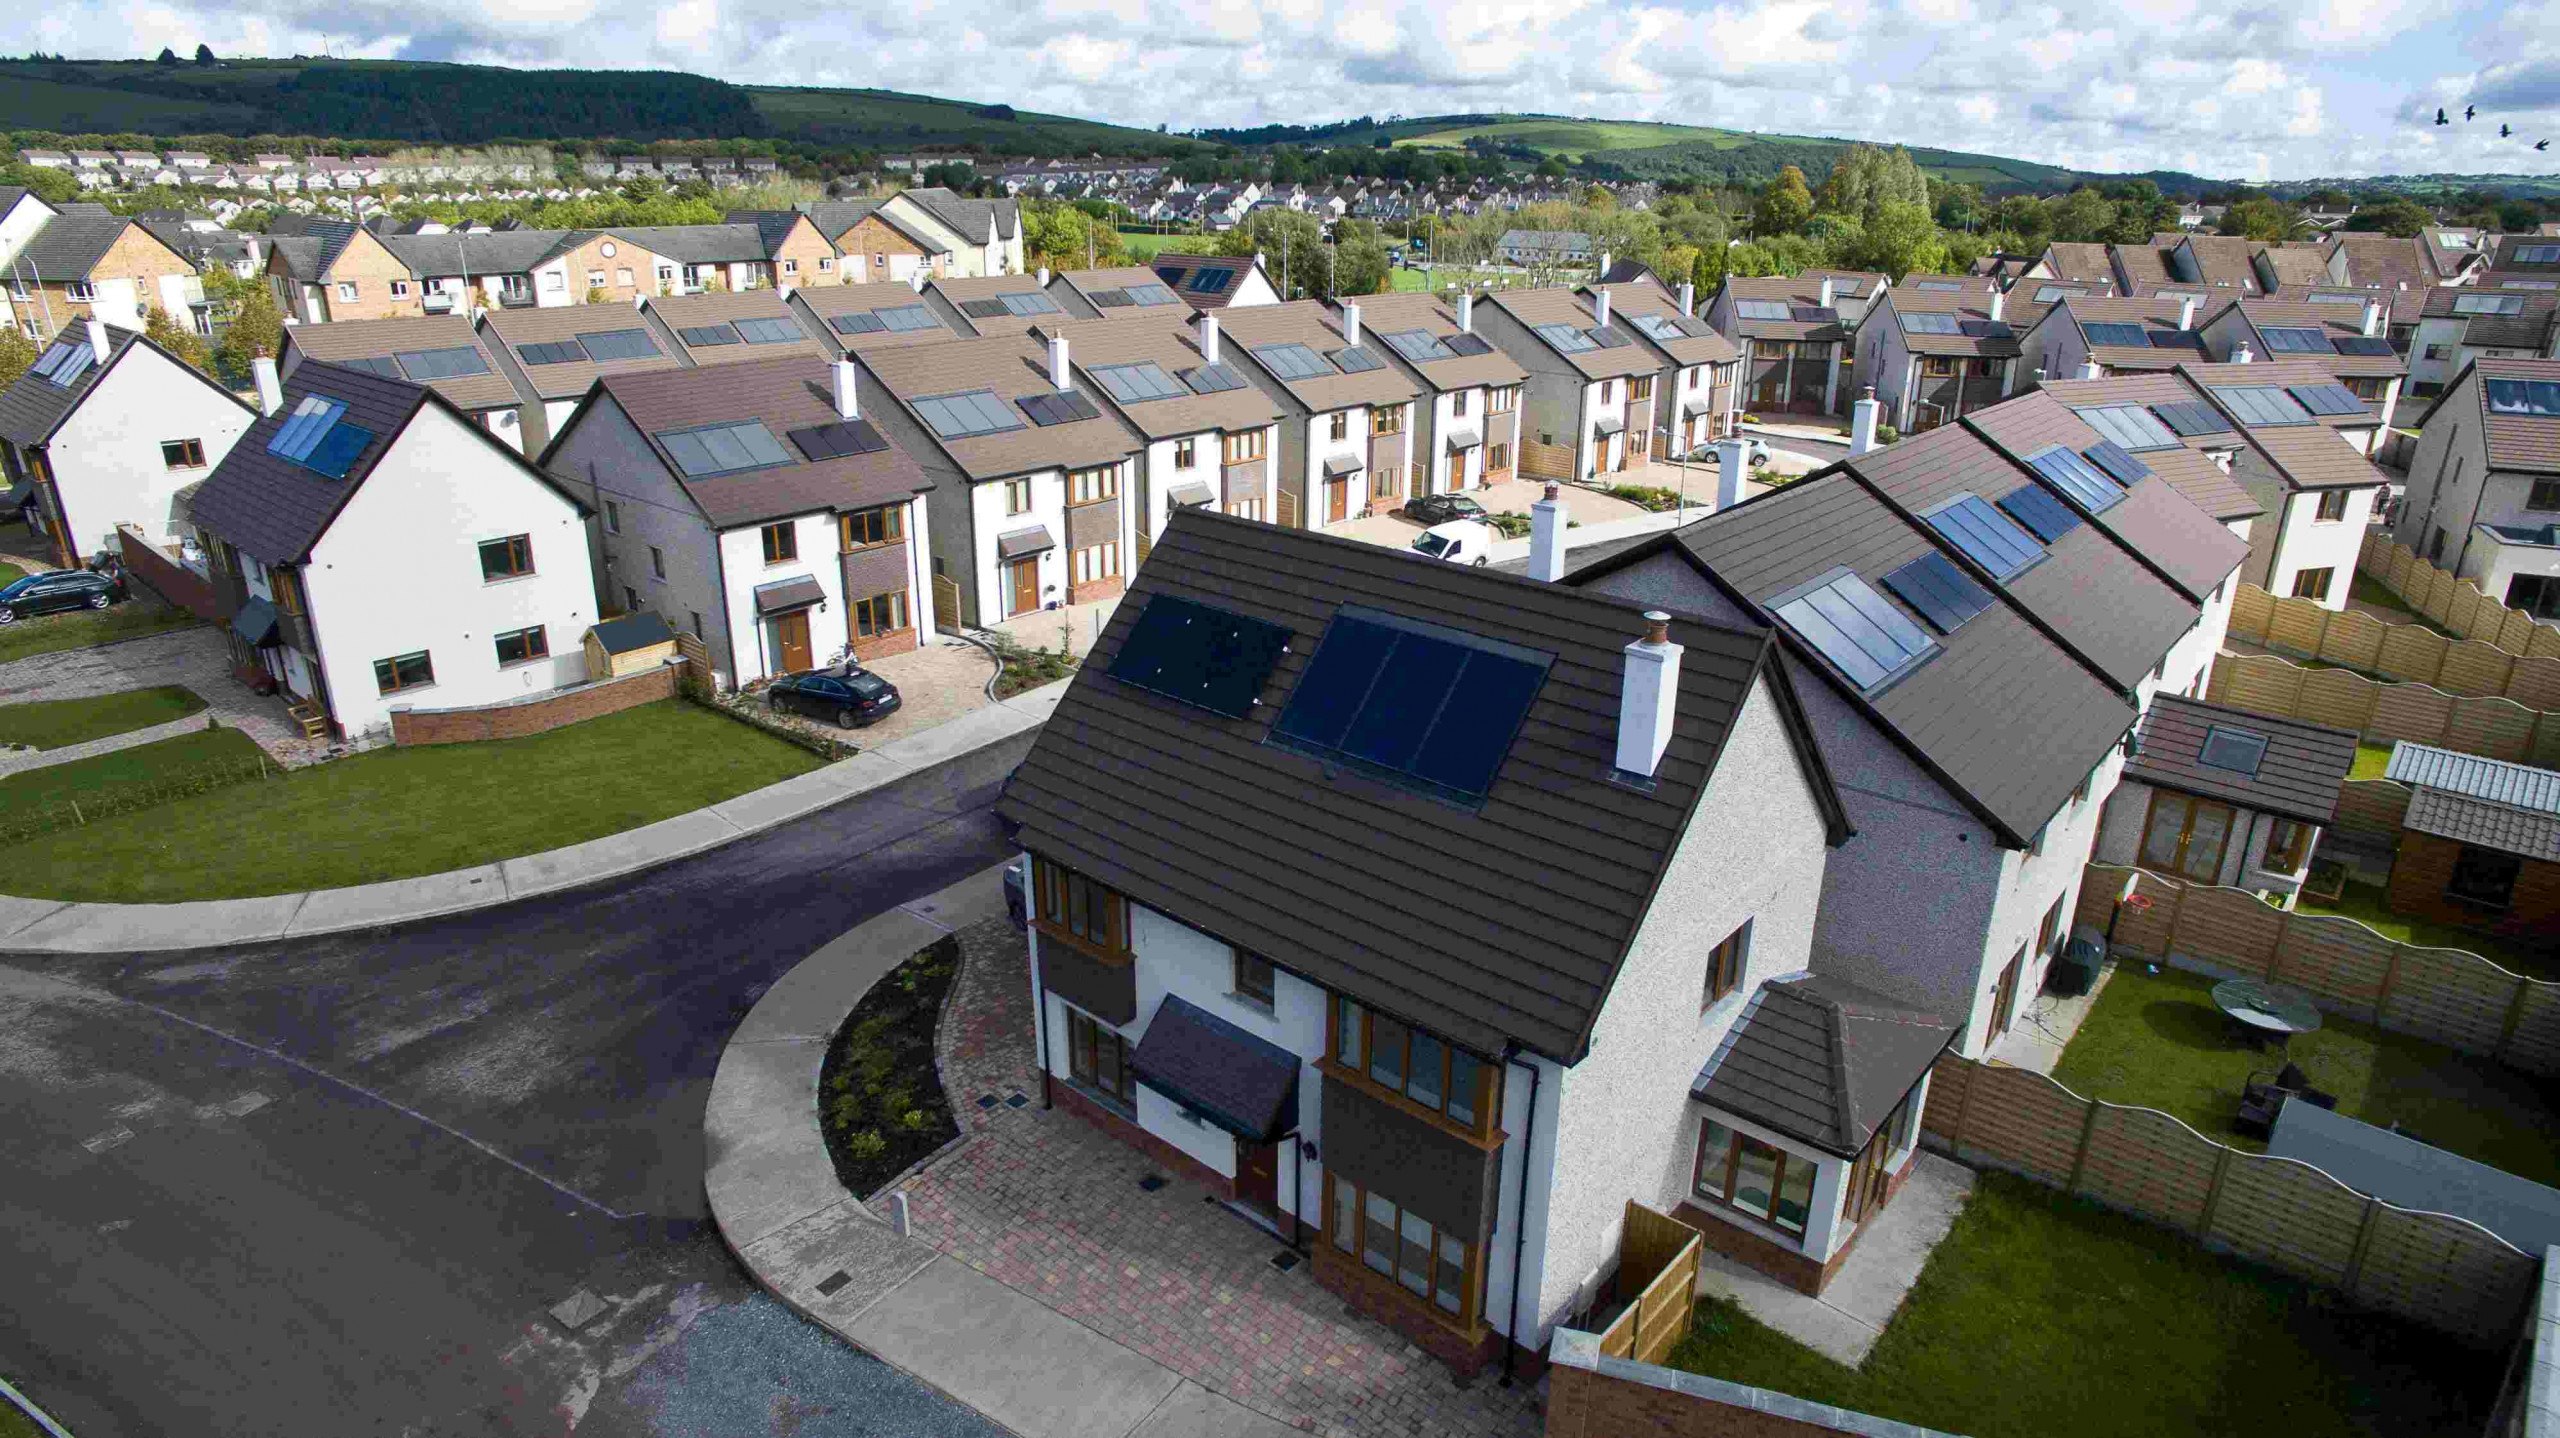 Solar Panel installation on two story residential estate in Ballincollig, Co. Cork